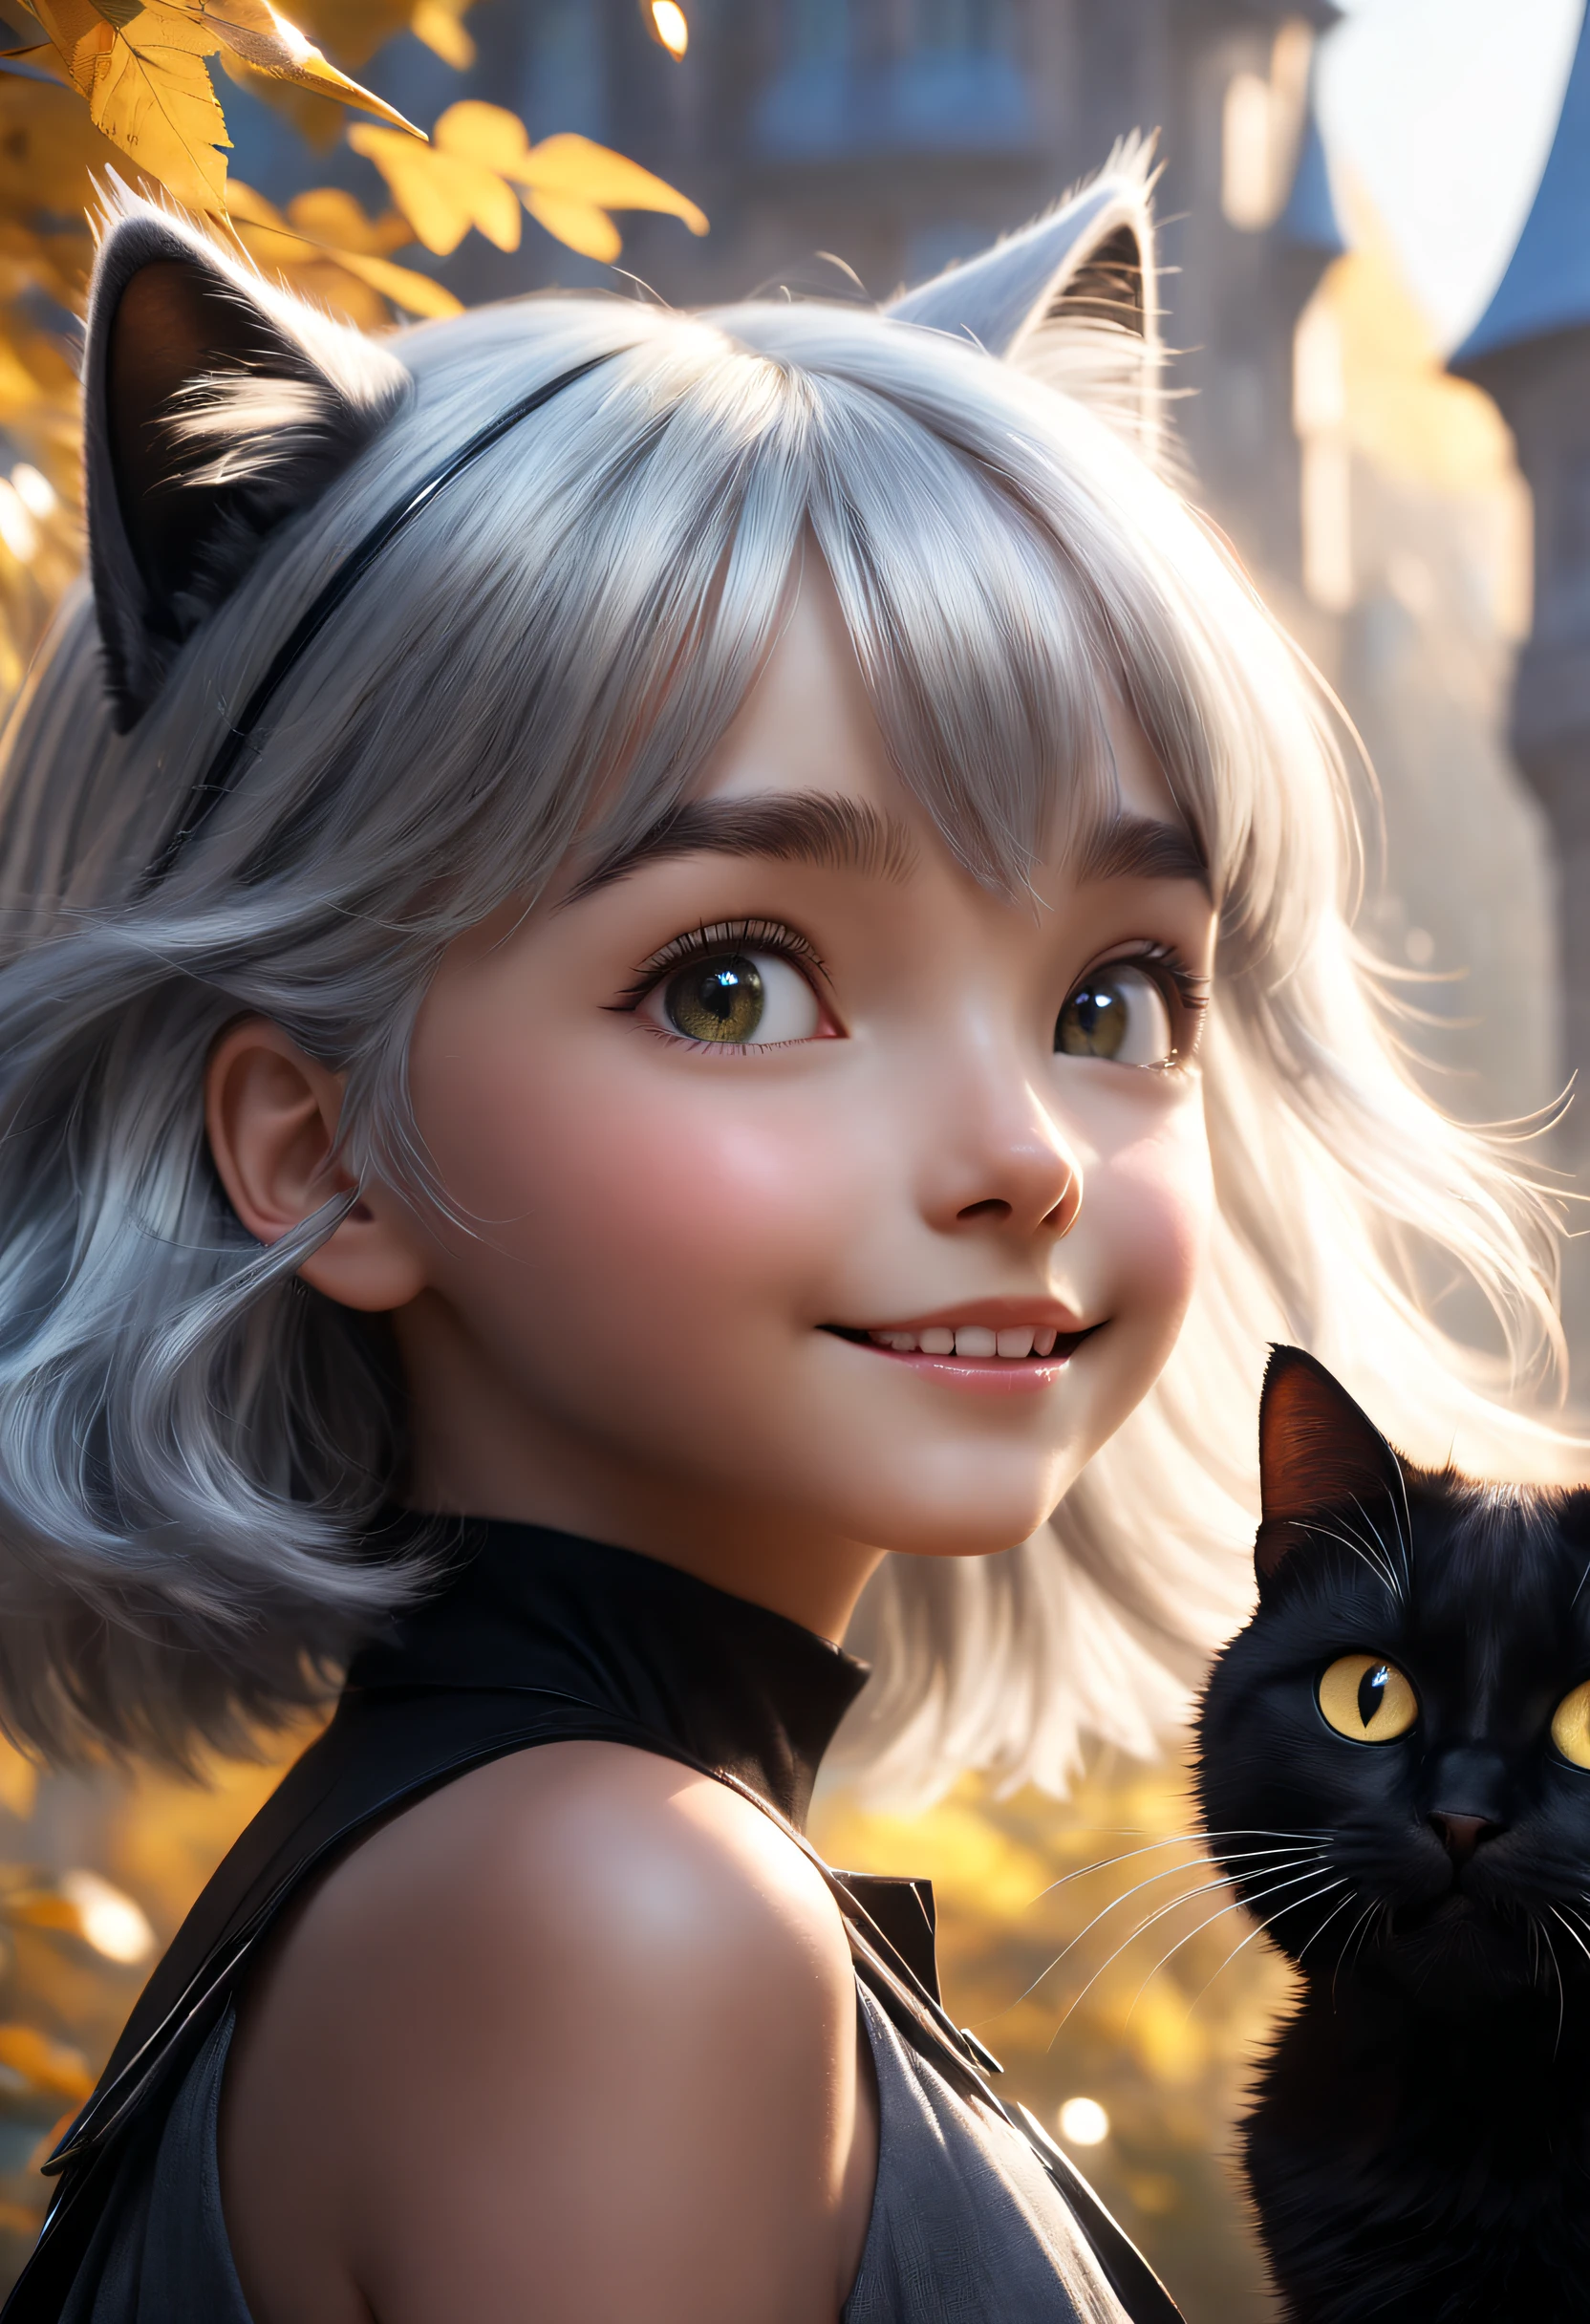 beautiful 8k uhd professional photograph, sharp focus, In a stunning fantasy world, a cute silver-haired girl and a mysterious 1giant black cat, beaming with joy, in bright natural light